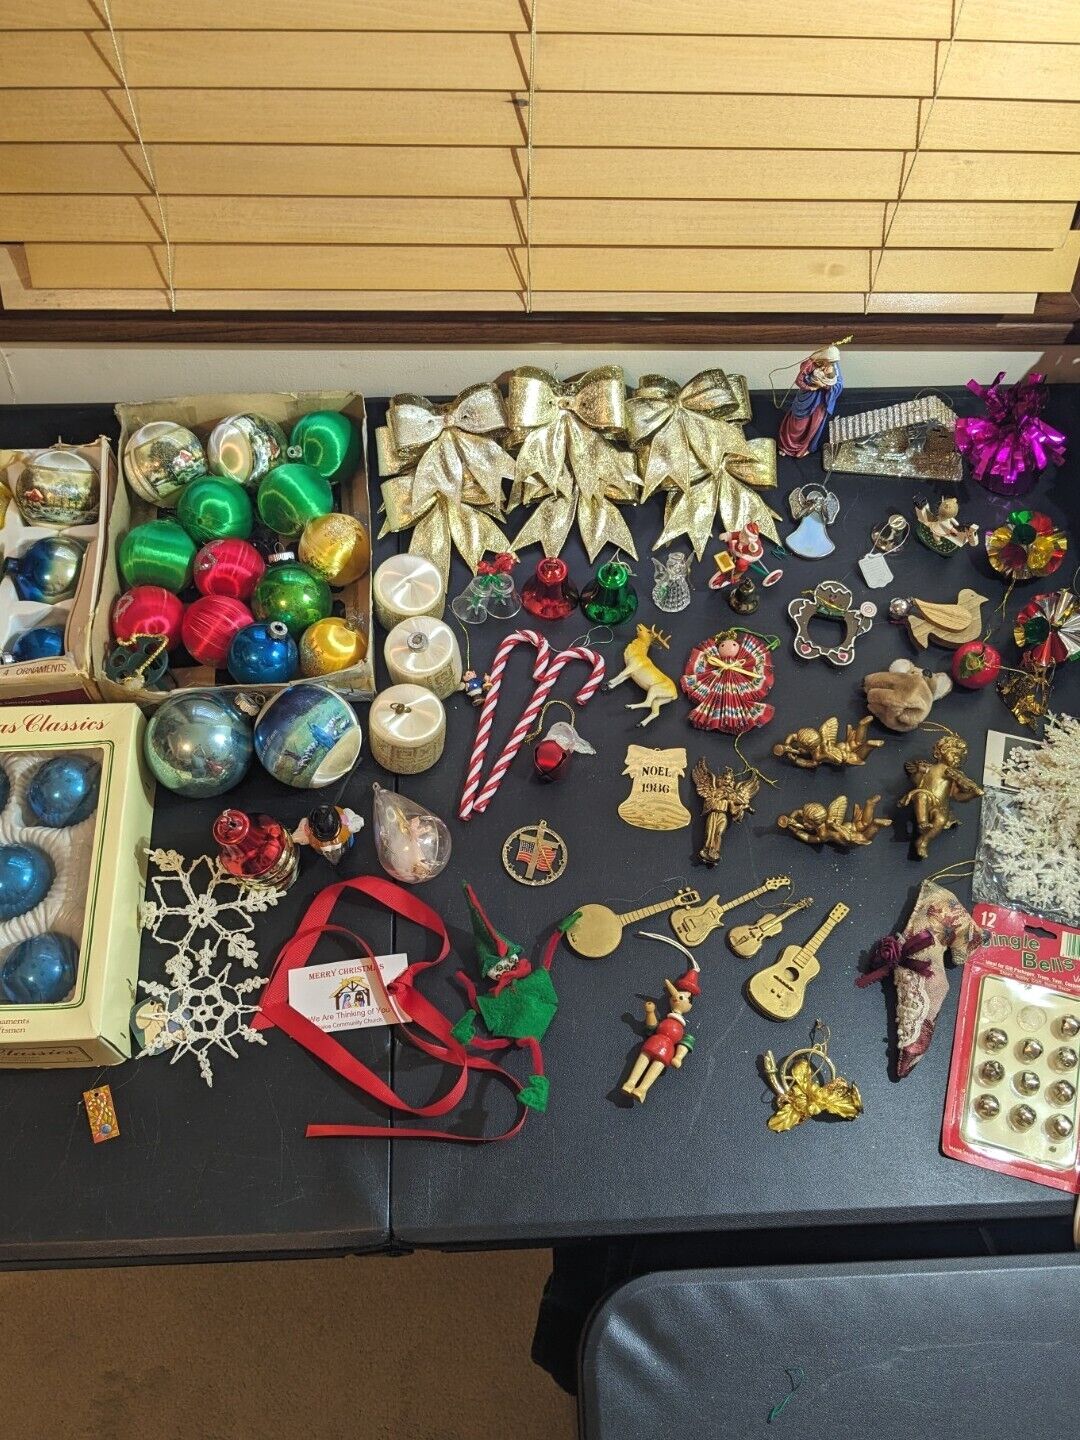 Vintage Christmas Decorations Huge Assortment Of Classic Holiday Ornaments